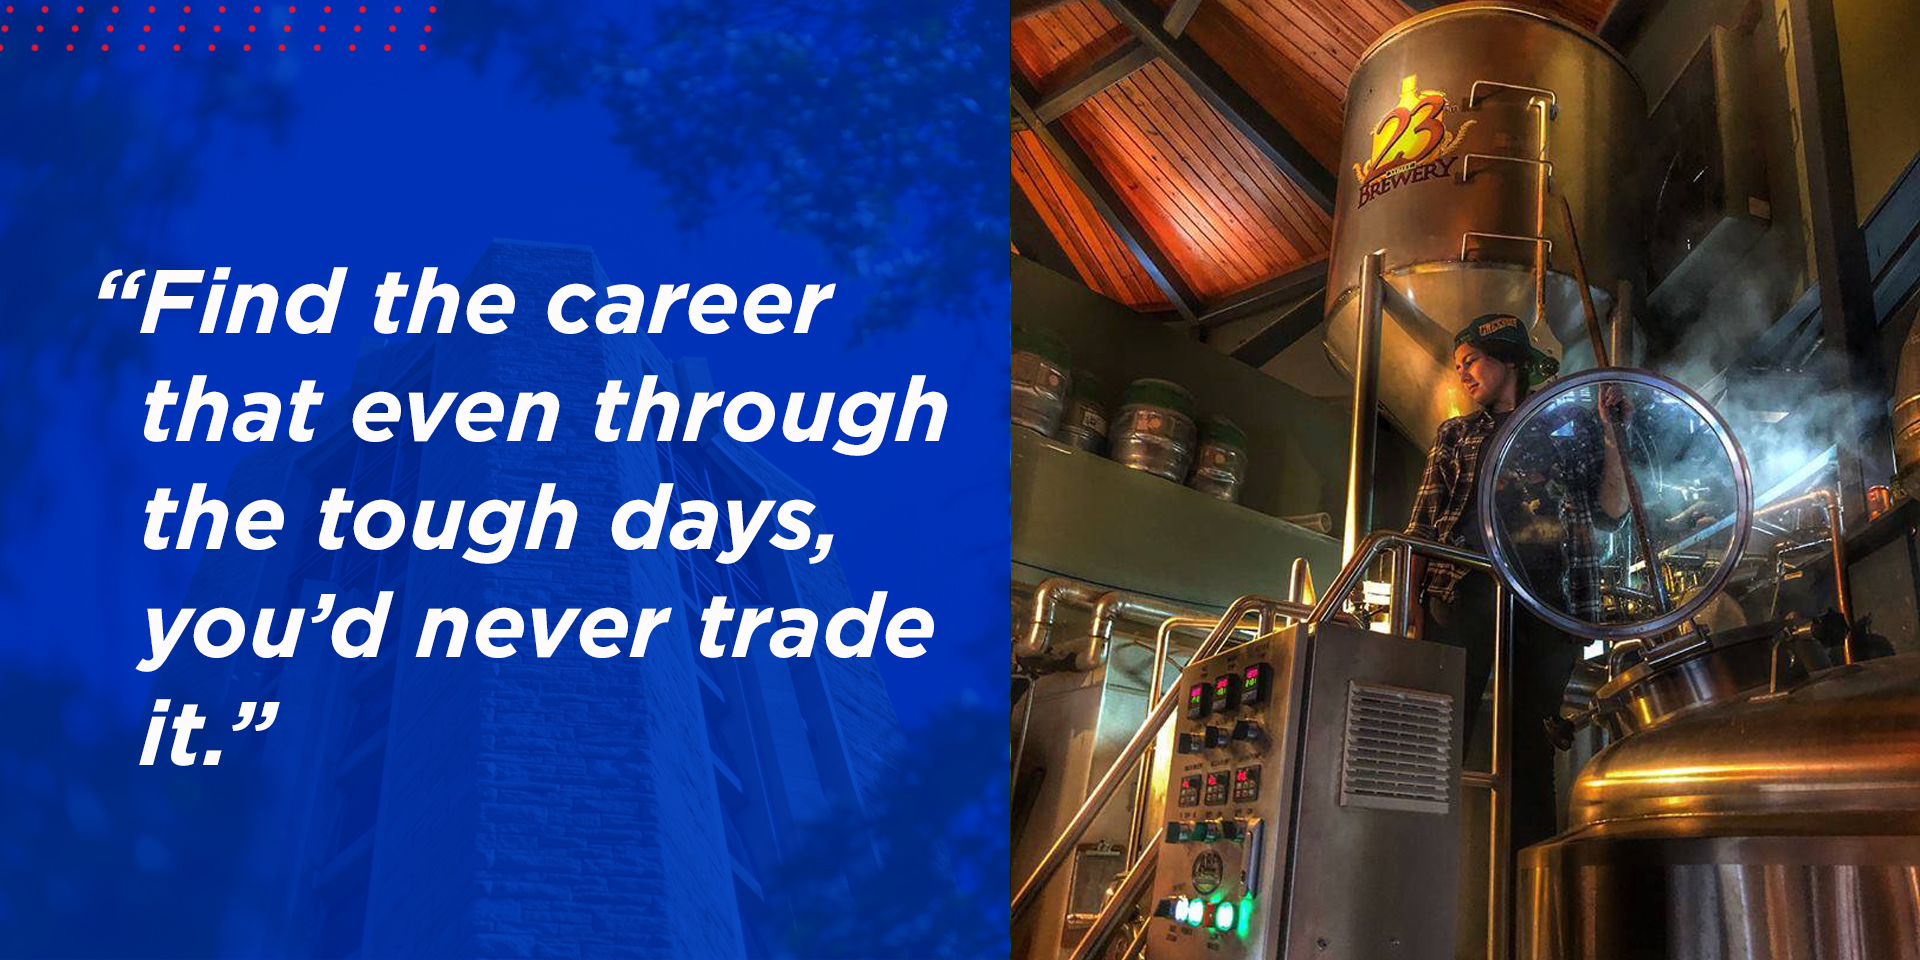 "Find the career that even through the tough days, you’d never trade it."